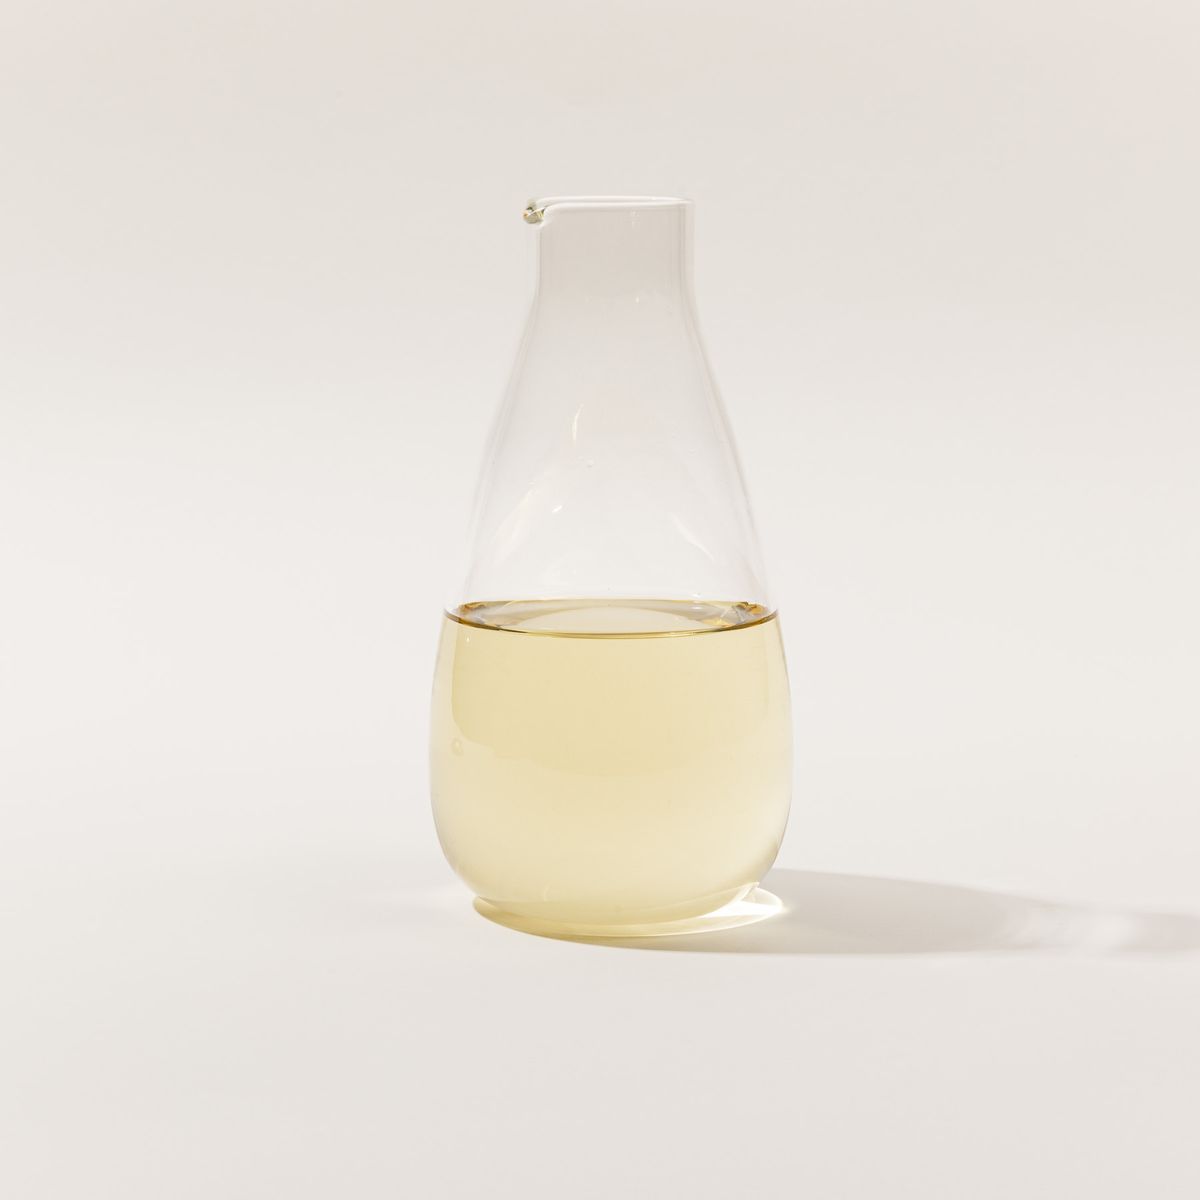 A simple elegant clear glass carafe filled with wine.